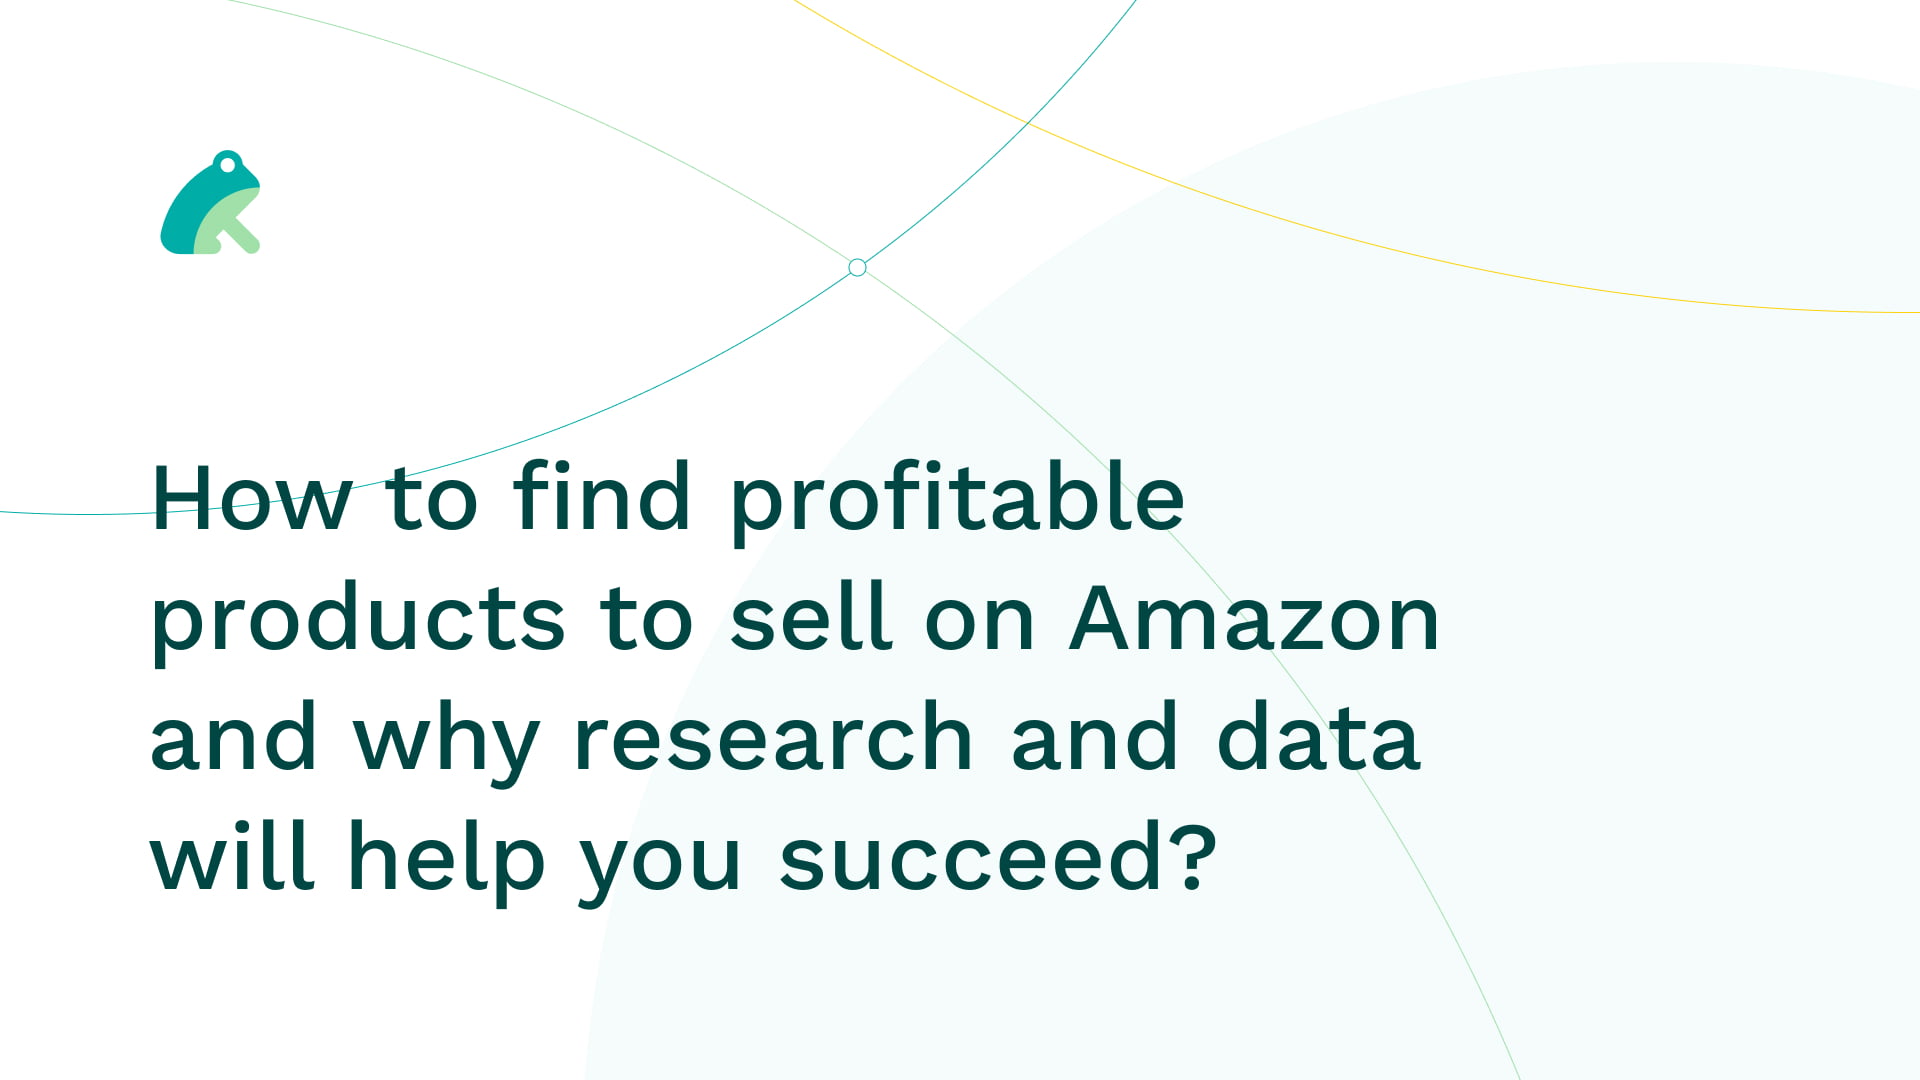 How to find profitable products to sell on Amazon and why research and data will help you succeed?